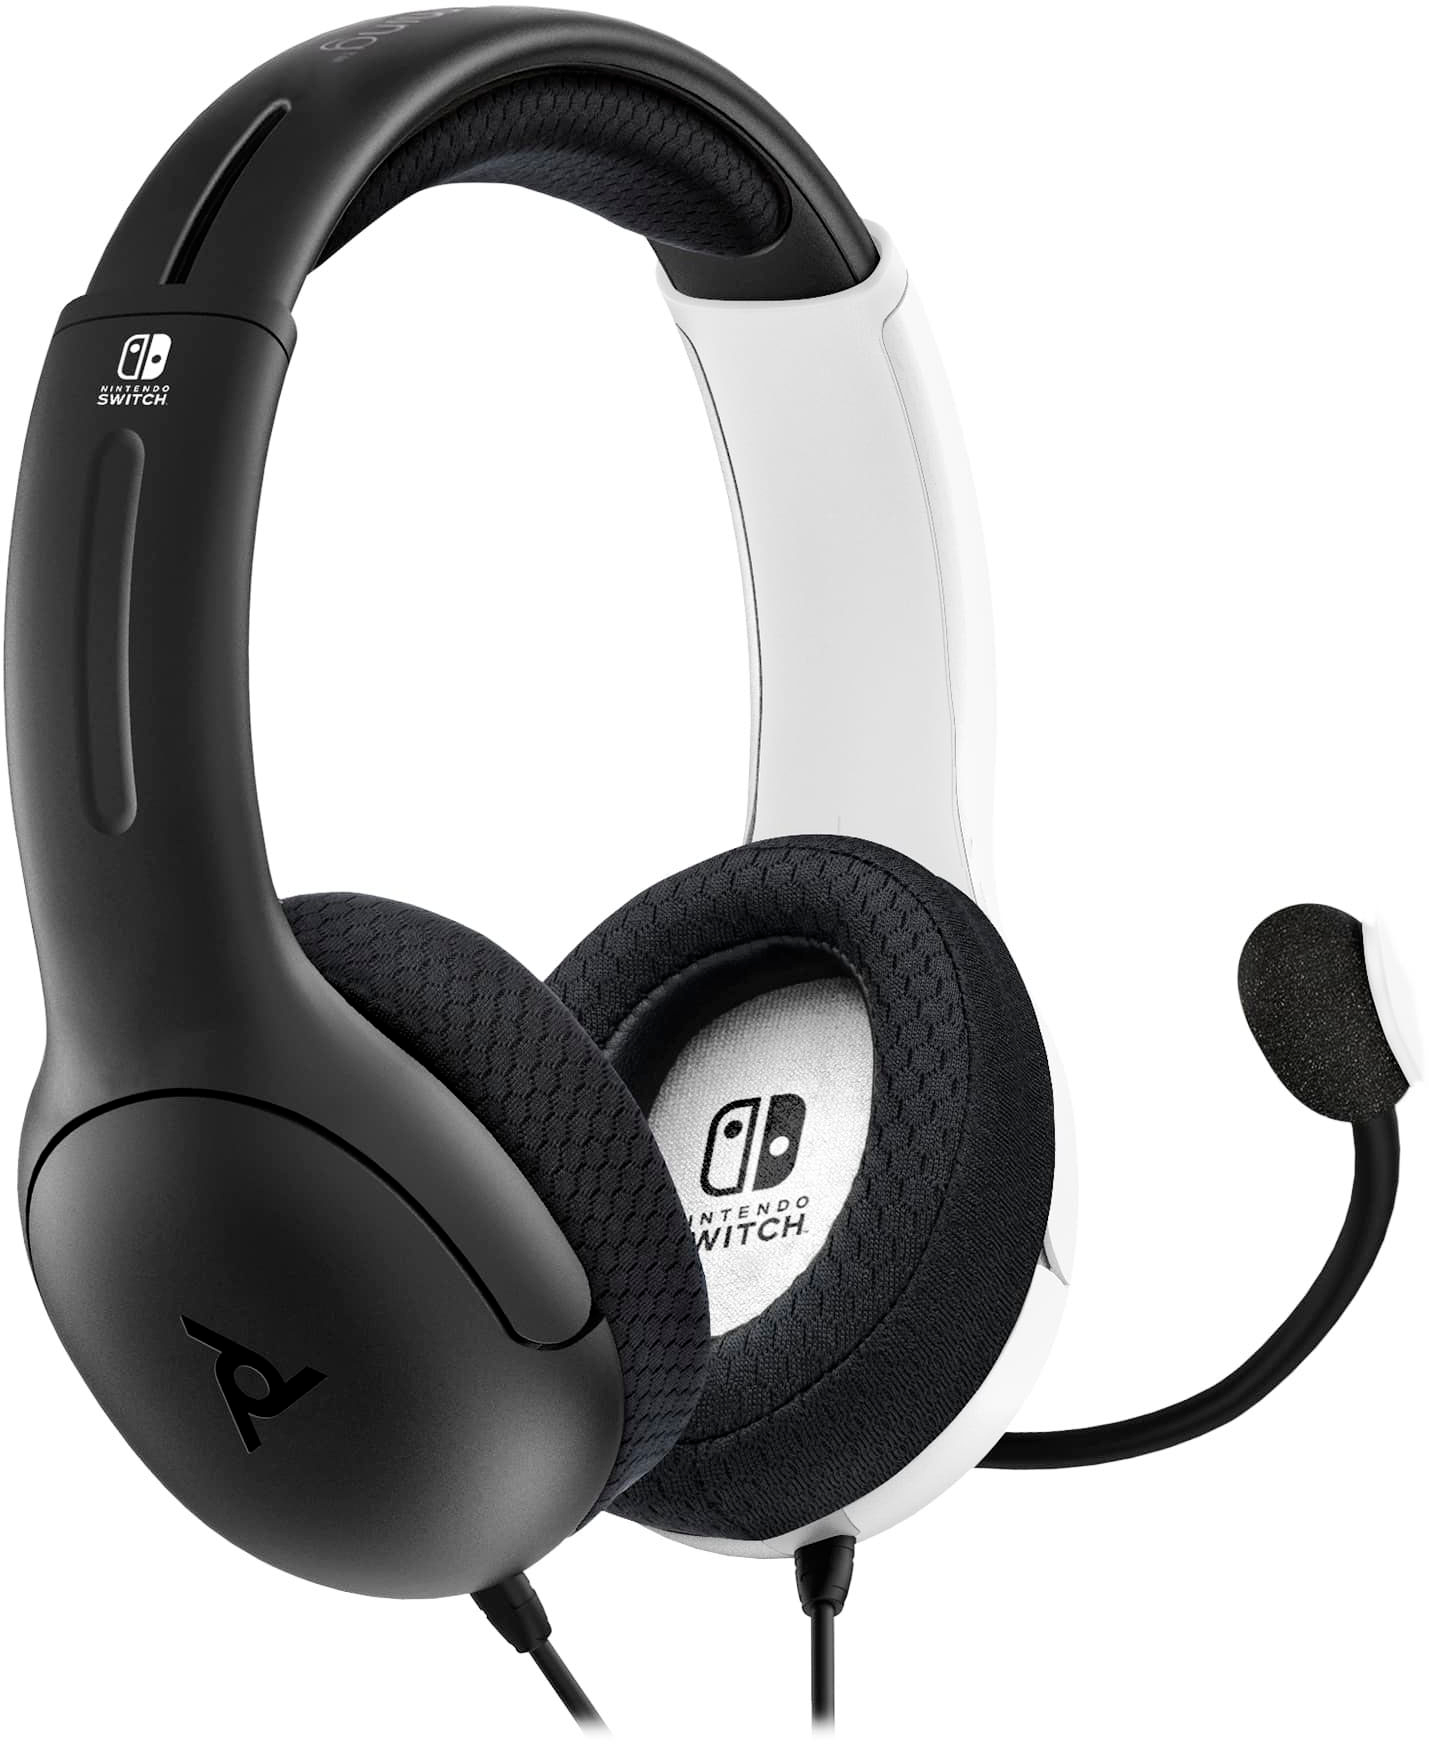 Angle View: PDP Gaming LVL40 Wired Stereo Gaming Headset for Nintendo Switch - Black and White